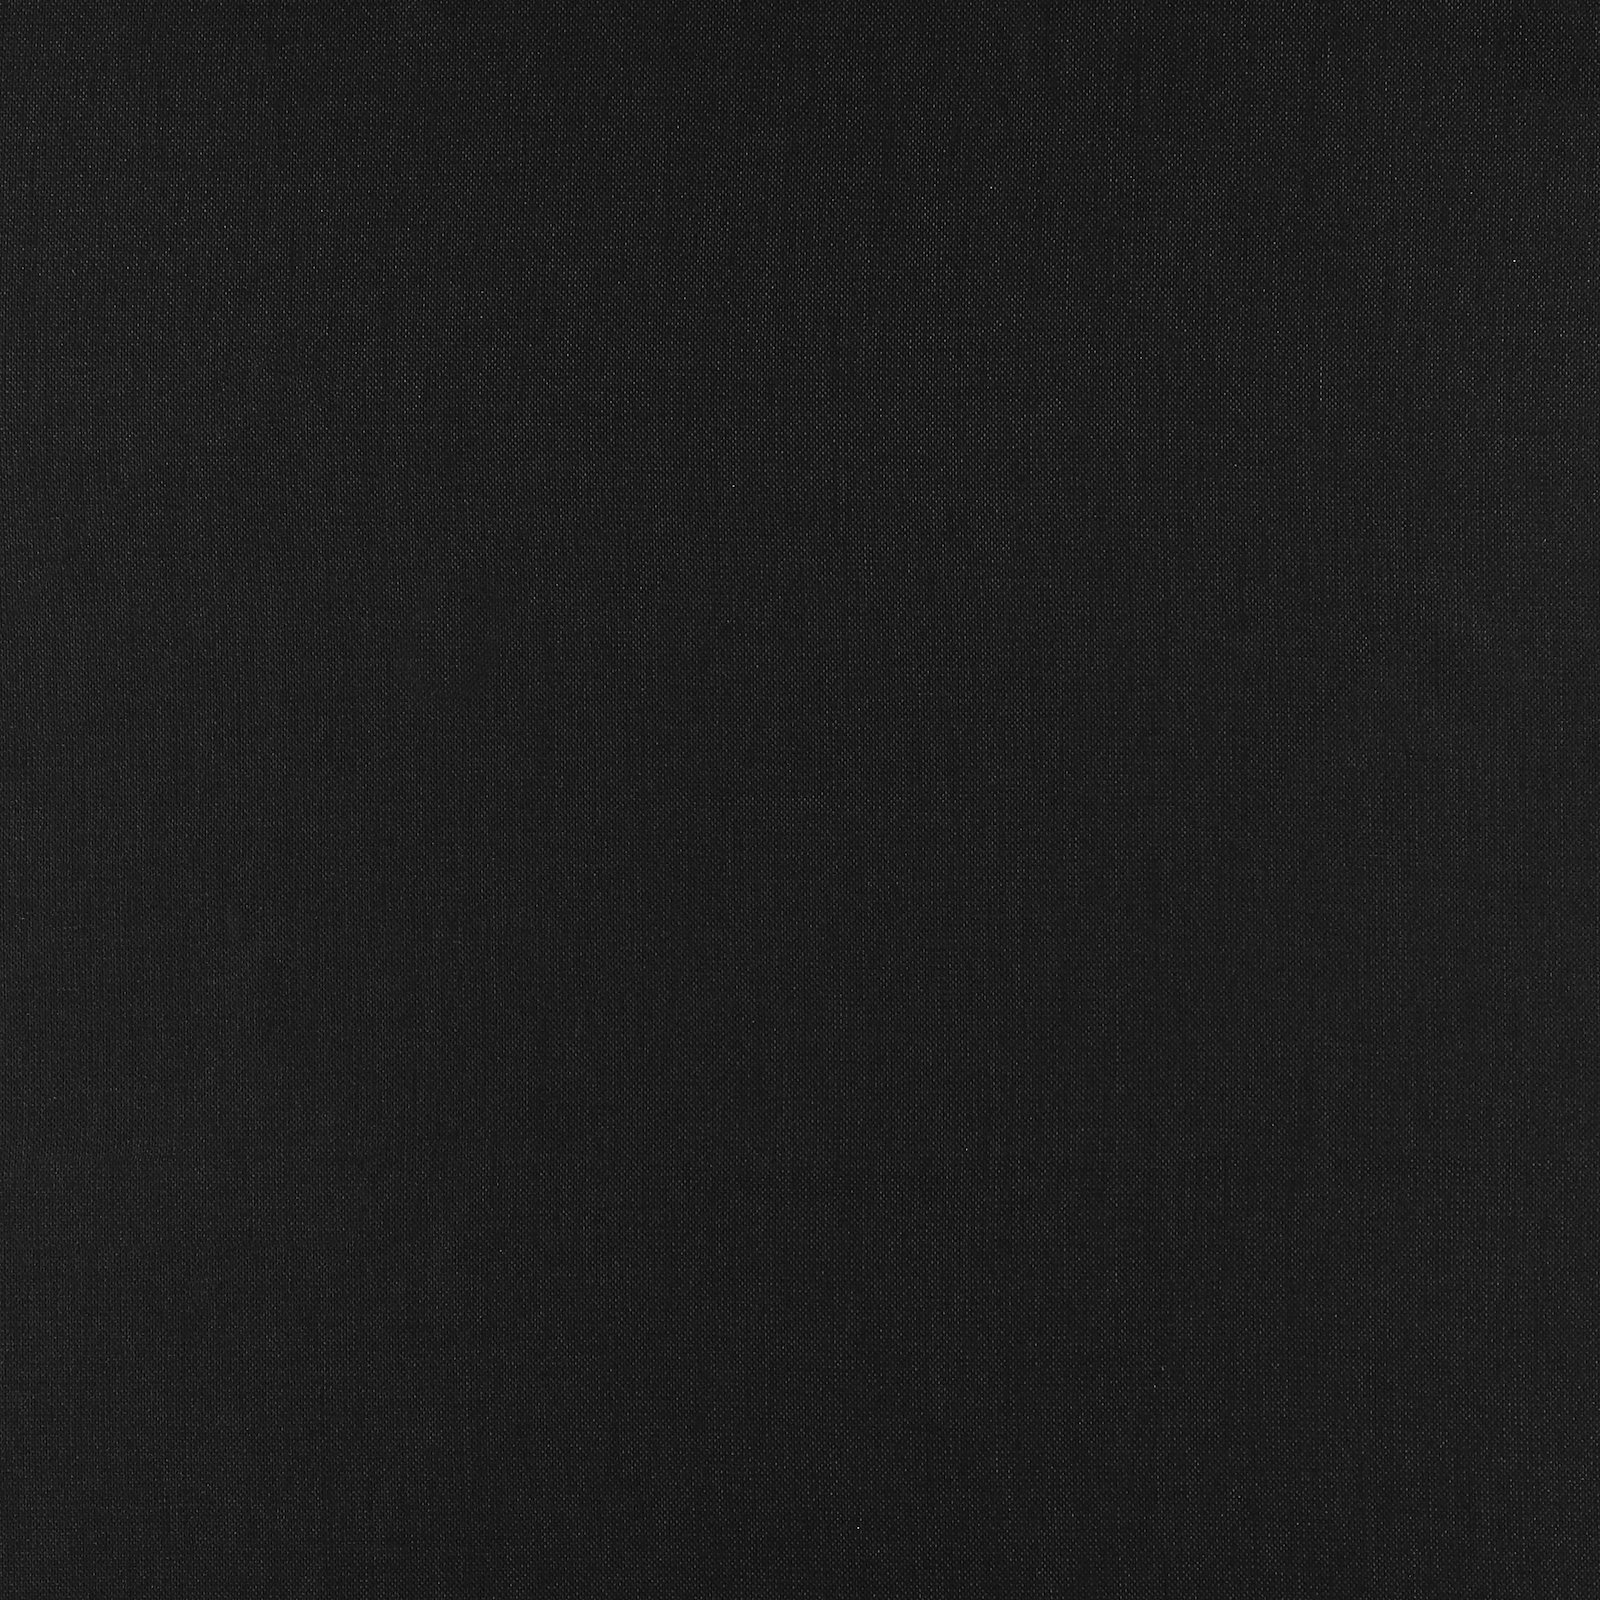 Upholstery fabric black 820978_pack_solid